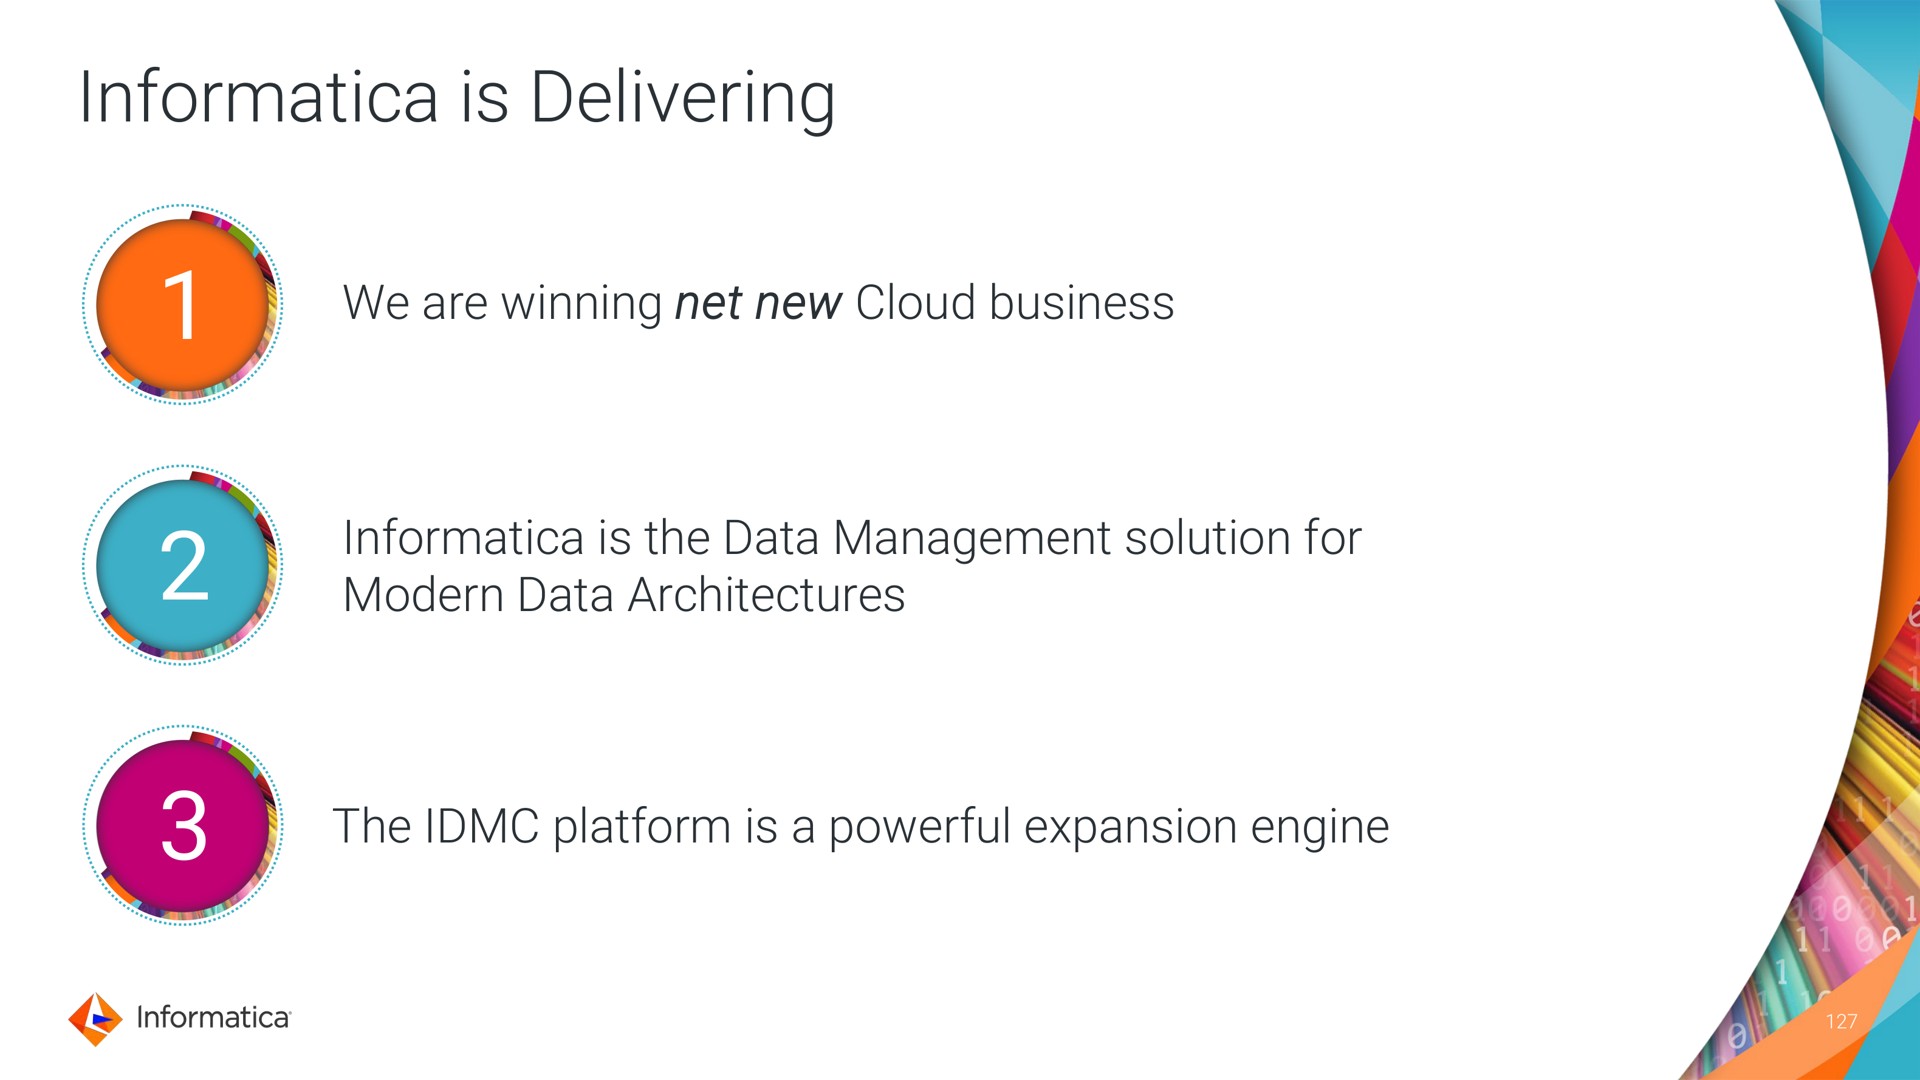 is delivering we are winning net new cloud business is the data management solution for modern data architectures the platform is a powerful expansion engine | Informatica